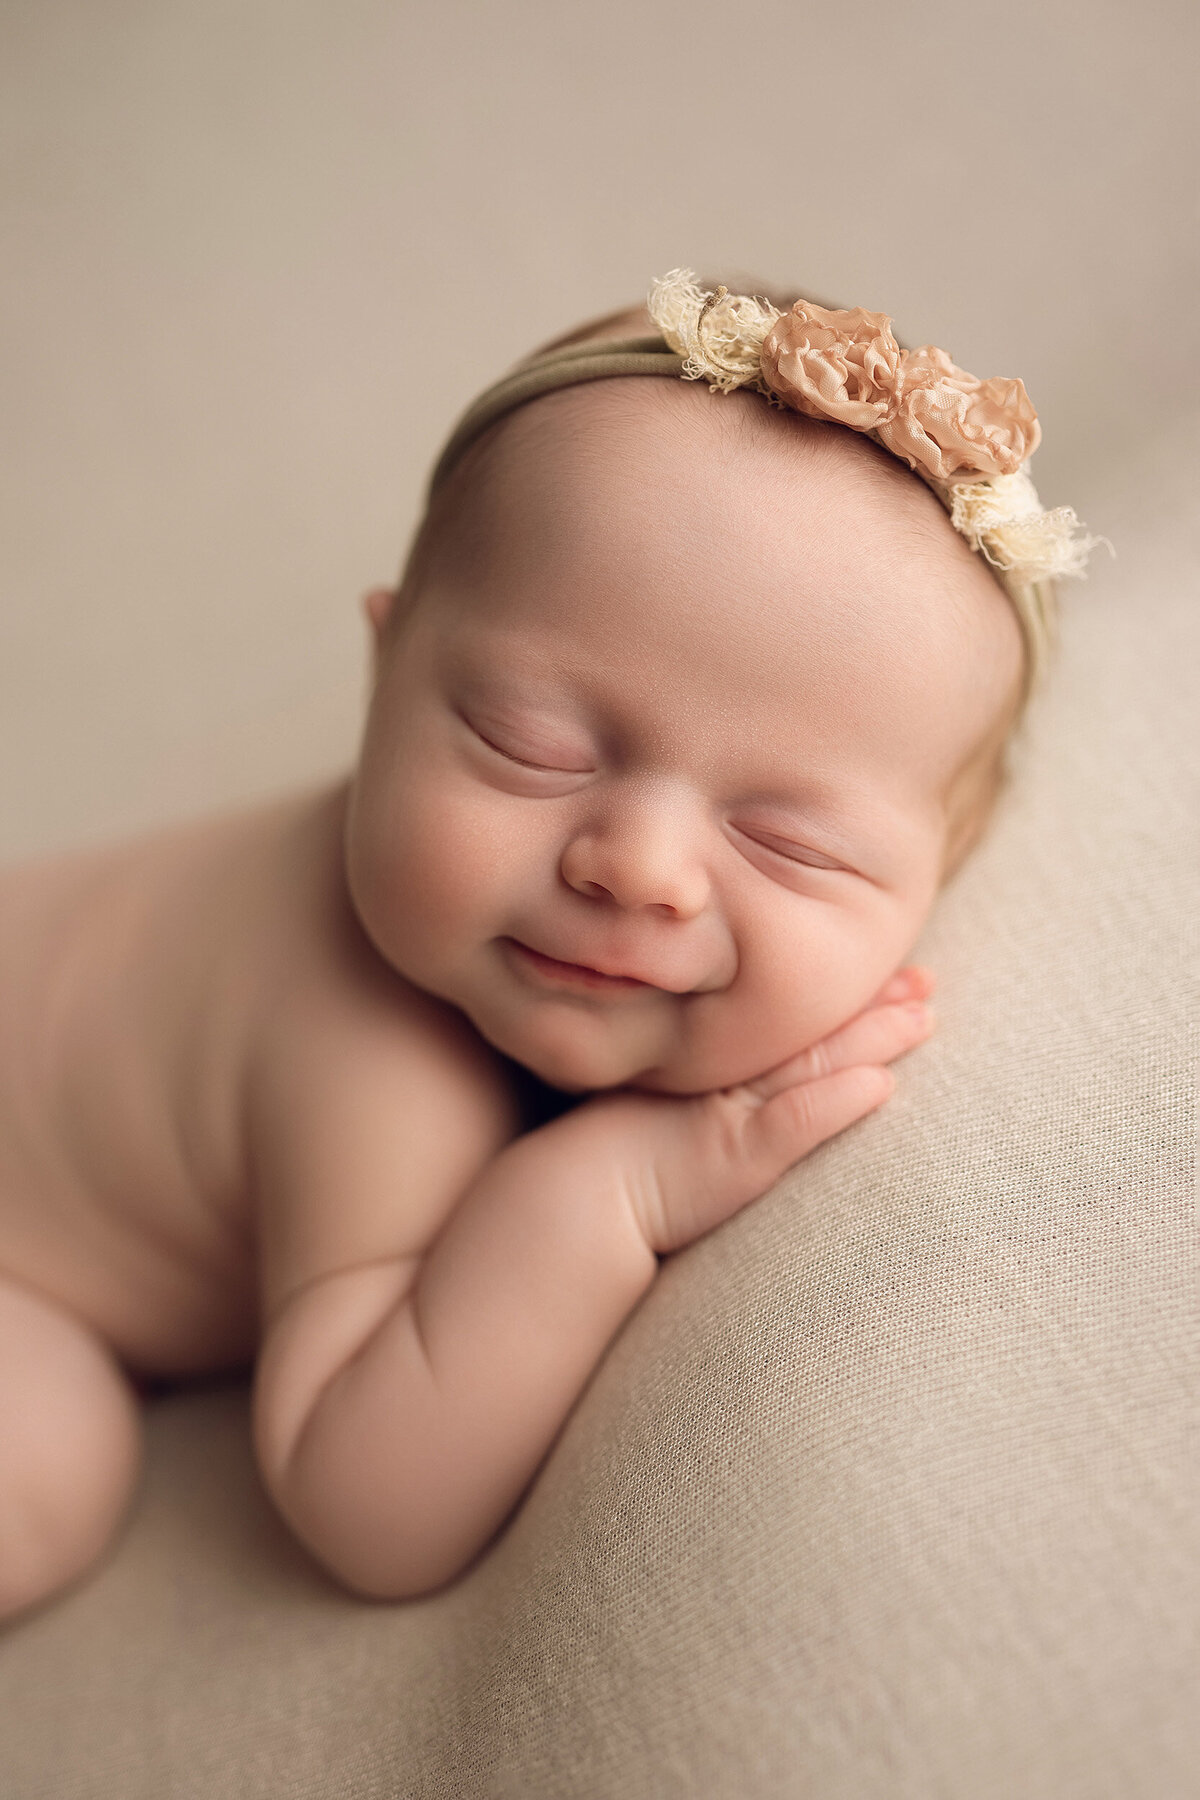 Portrait of sleeping newborn smiling with eyes closed wearing a flowered headband.